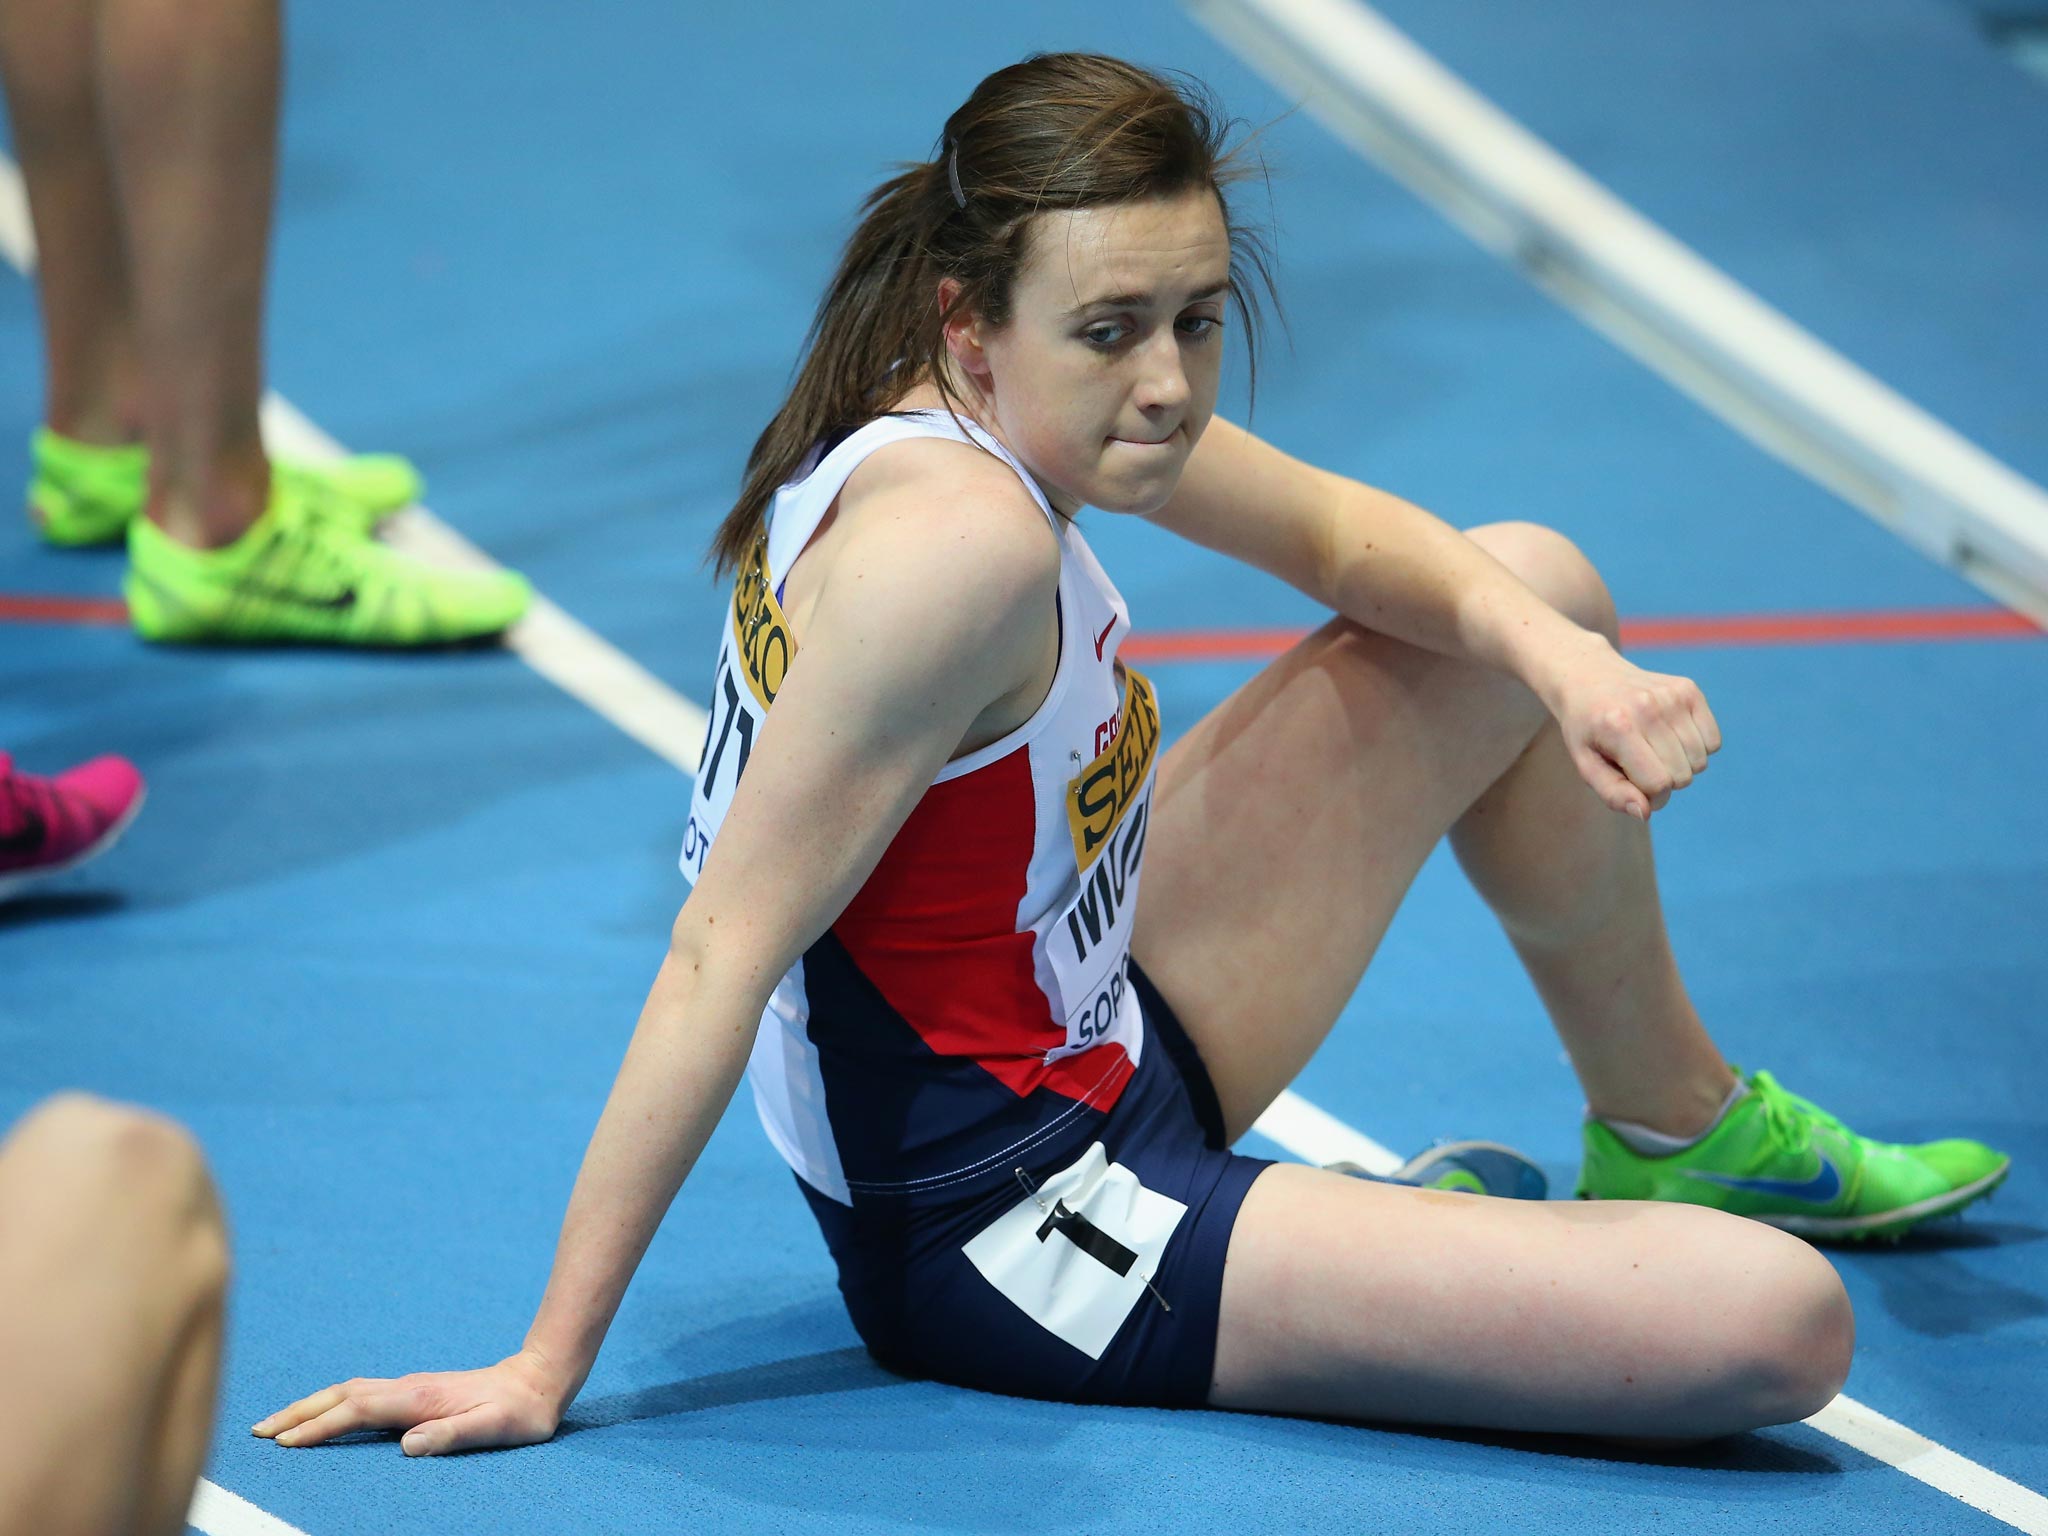 Laura Muir is disconsolate as she dwells on her failure in the 800m